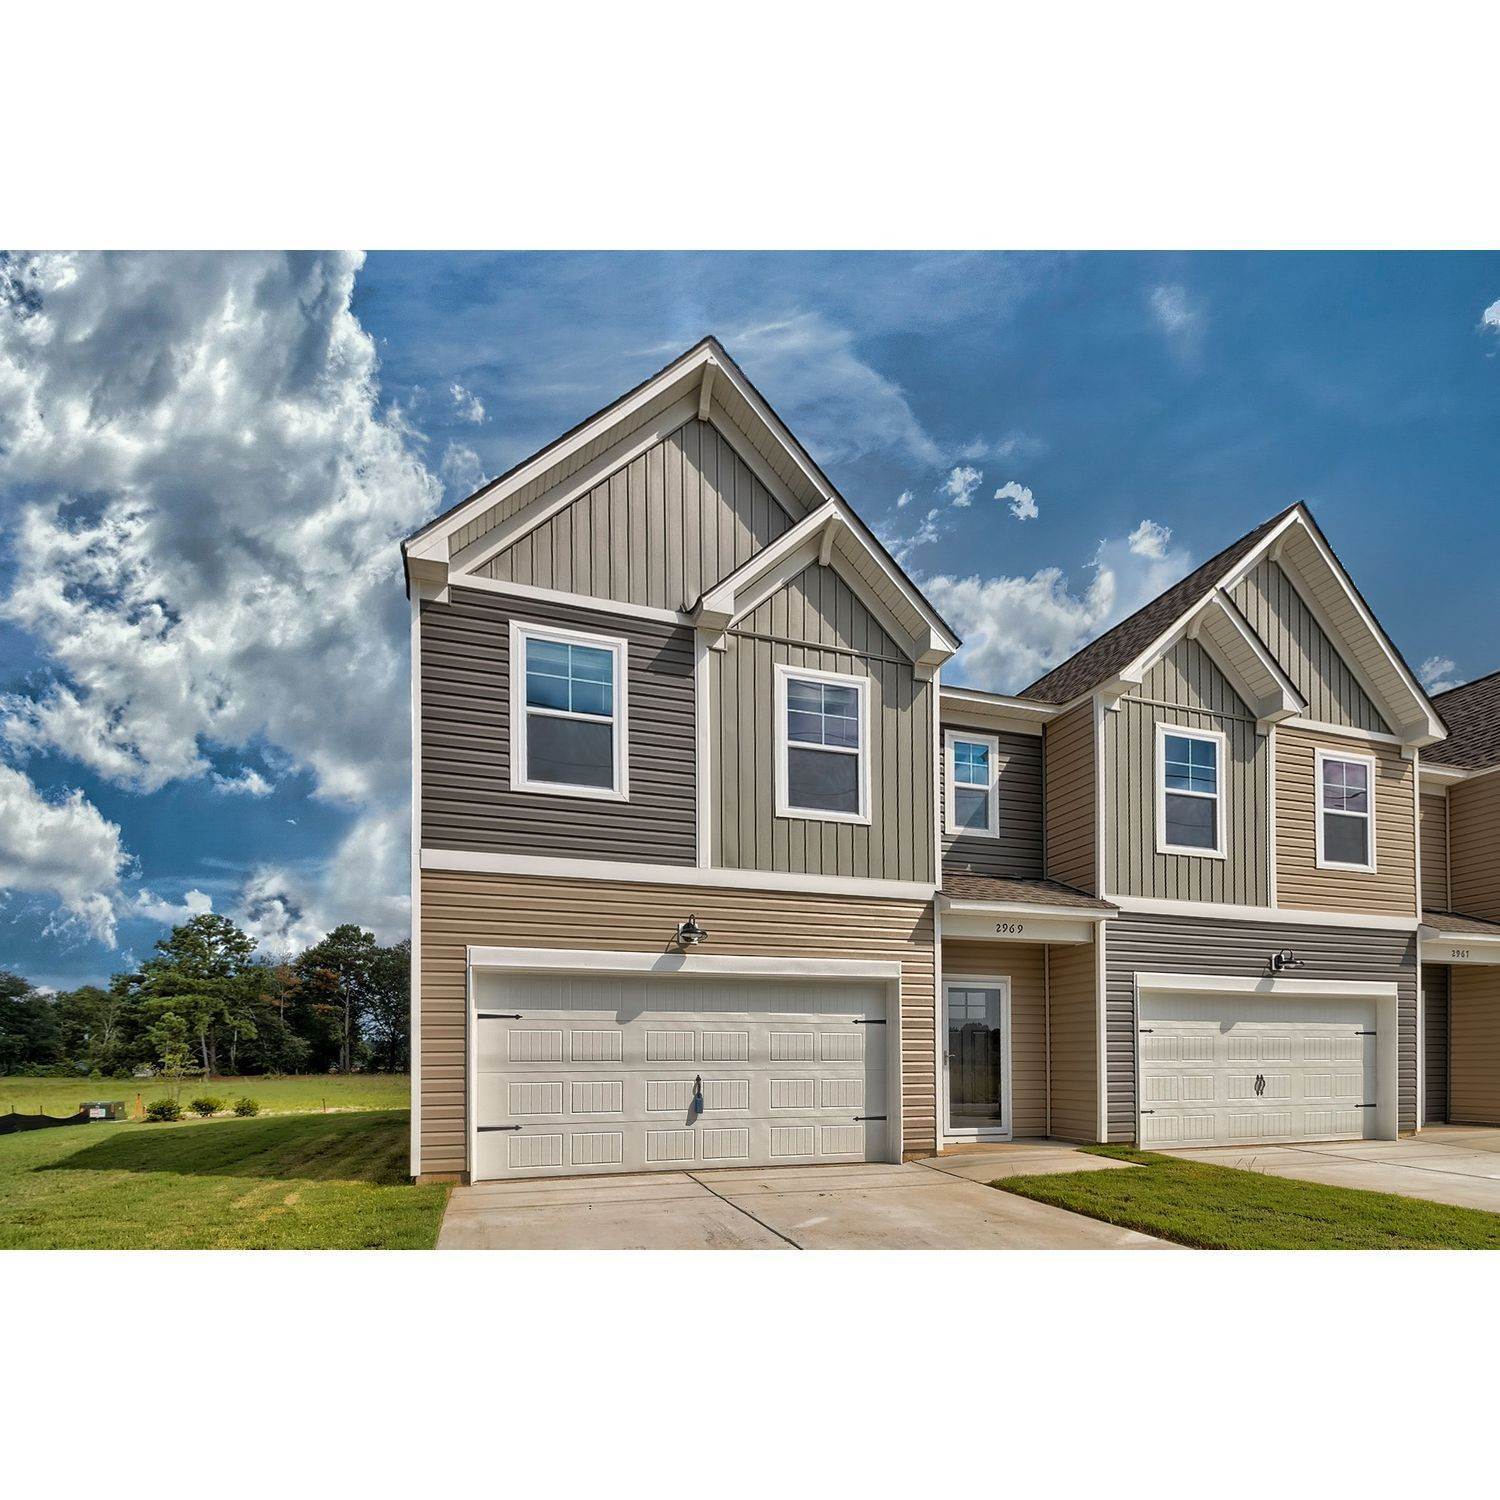 Townhomes at Hunter's Crossing κτίριο σε 1910 Flagpole Drive, Sumter, SC 29150